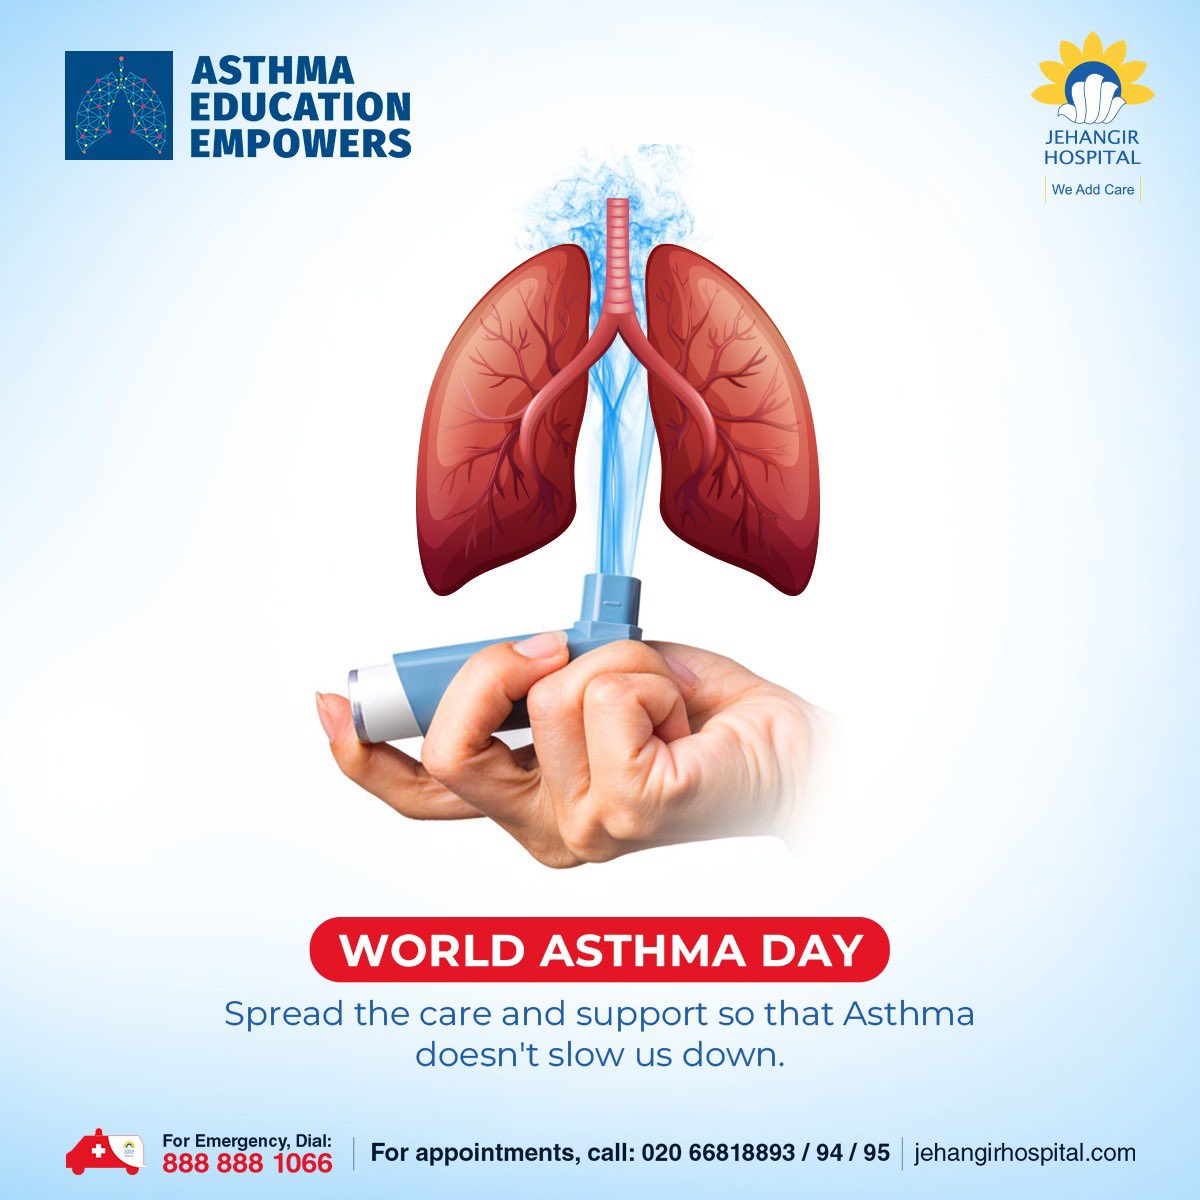 This World Asthma Day, let's:

Learn the signs and symptoms of asthma.
Seek professional diagnosis if you experience breathing difficulties.
Talk to your doctor about managing your asthma effectively.

#JehangirHospital #WeAddCare #PatientFirst  #WorldAsthmaDay #asthma